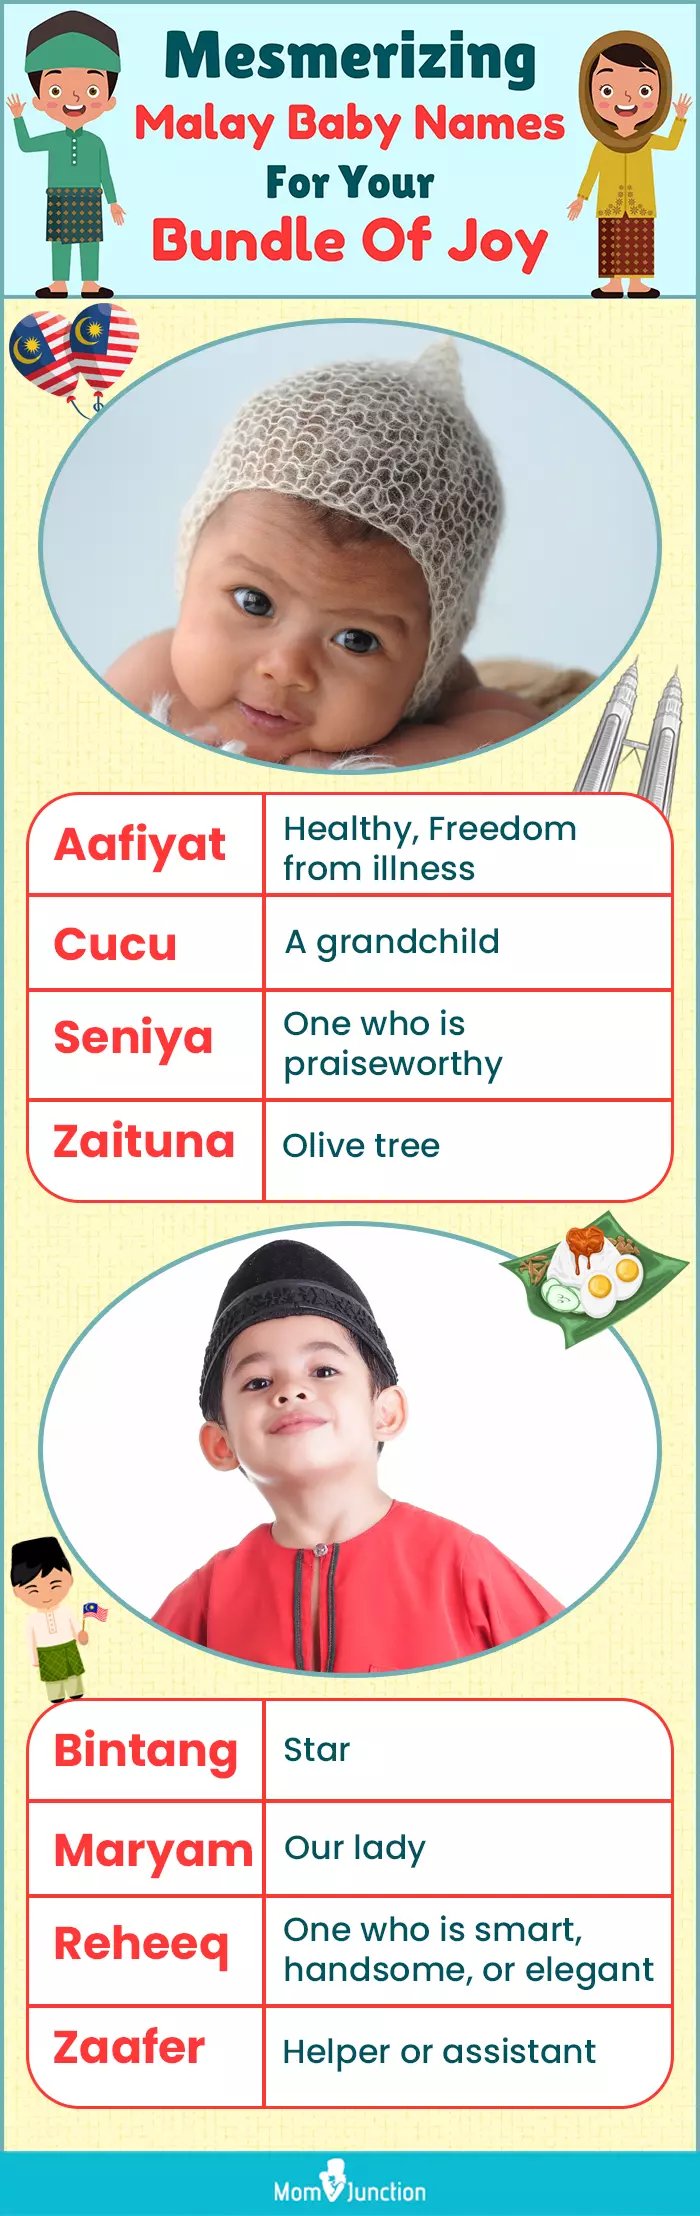 mesmerizing malay baby names for your bundle of joy (infographic)